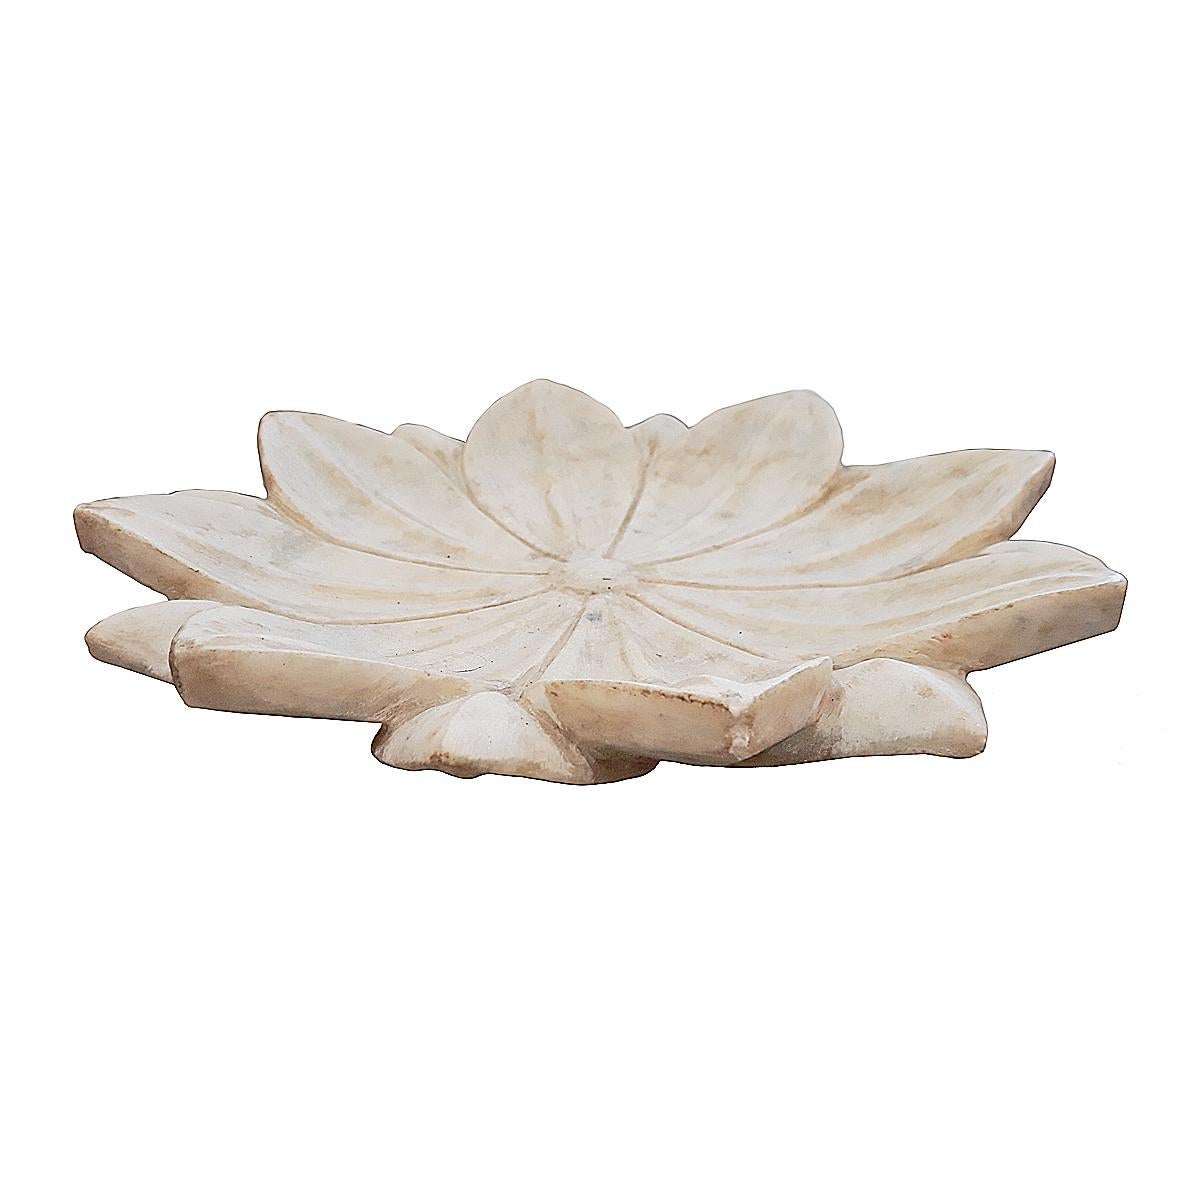 Indian Hand-Carved Marble Lotus Plate, Mid 20th Century